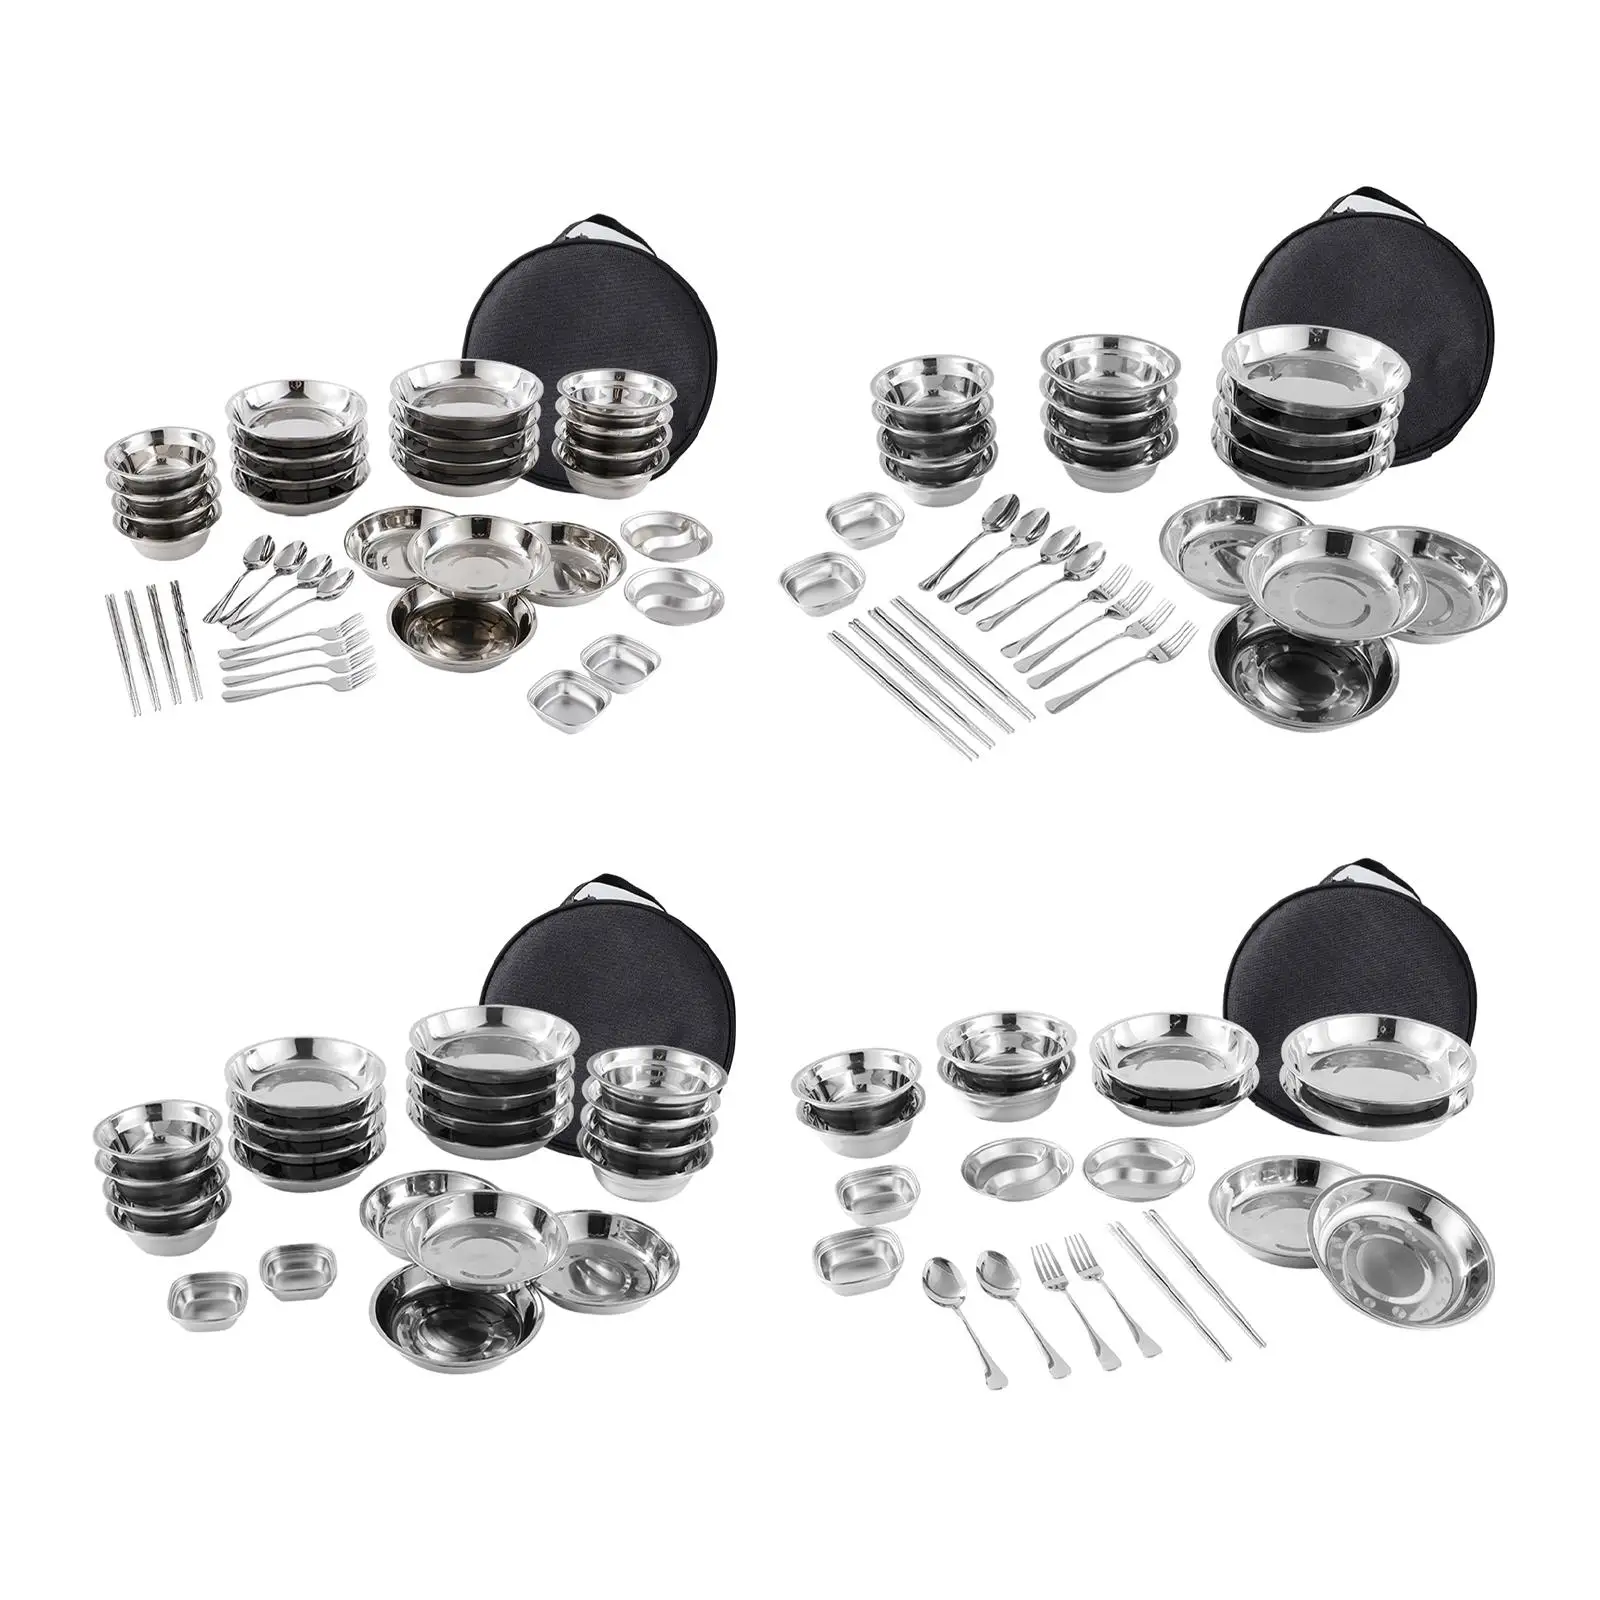 

Stainless Steel Plates and Bowls Camping Set Dinnerware Dishes Camping Utensils Set for Outdoor Use Barbecue Travel Party